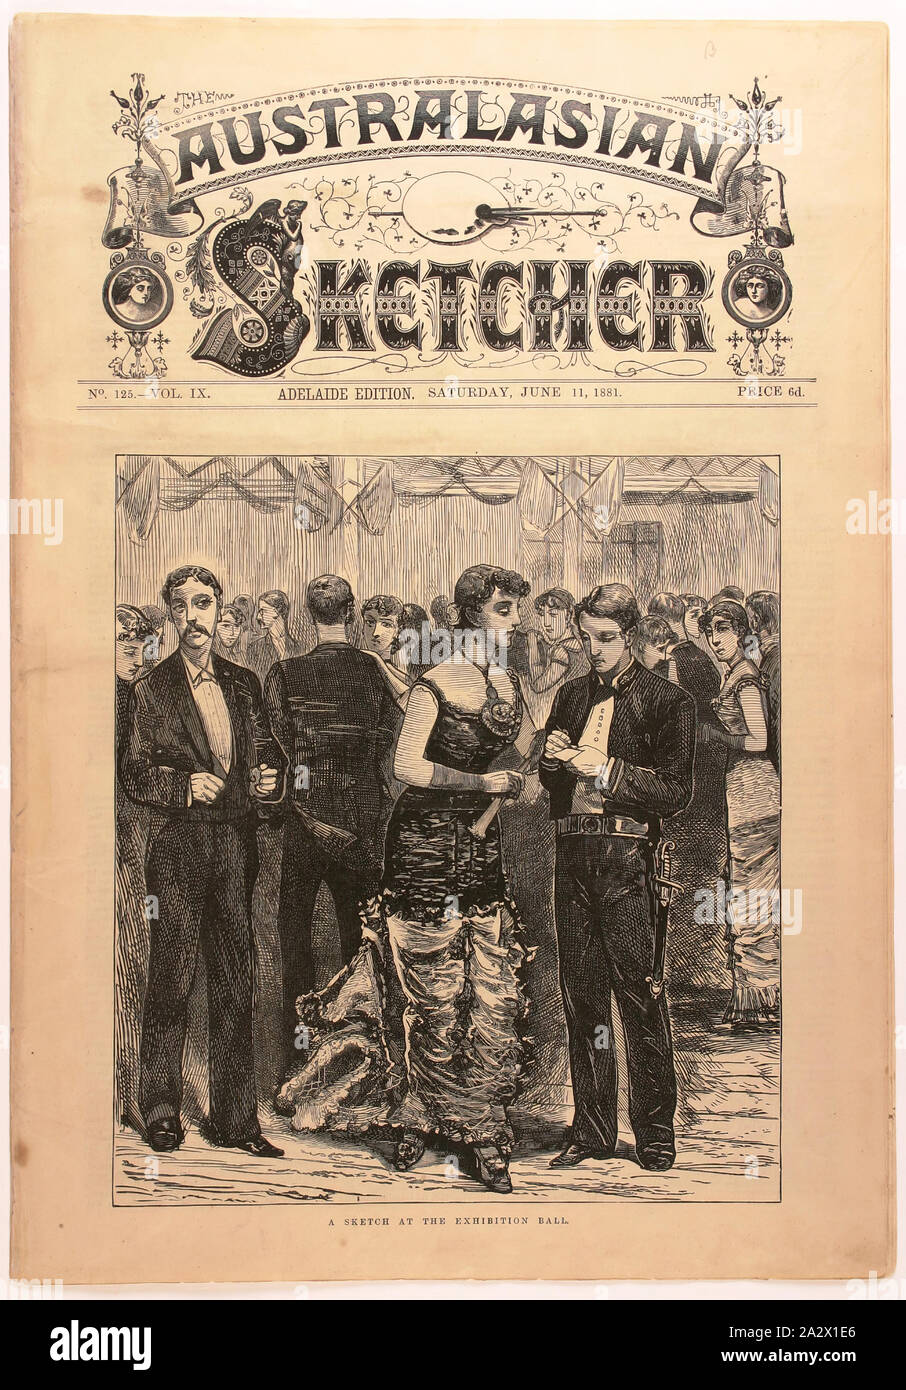 Newspaper - 'A Sketch at the Exhibition Ball', The Australasian Sketcher, Adelaide, 11 Jun 1881, Copy of The Australasian Sketcher, Adelaide edition, 11 June 1881 (pp177-92), published by G.N. & W.H. Birks, Adelaide. The front page illustration depicts the Exhibition Ball held on 1 June 1881 at the Exhibition Building to mark the close of the Melbourne International Exhibition. The newspaper contains illustrations and extensive text including articles about the Exhibition. The Ball was Stock Photo